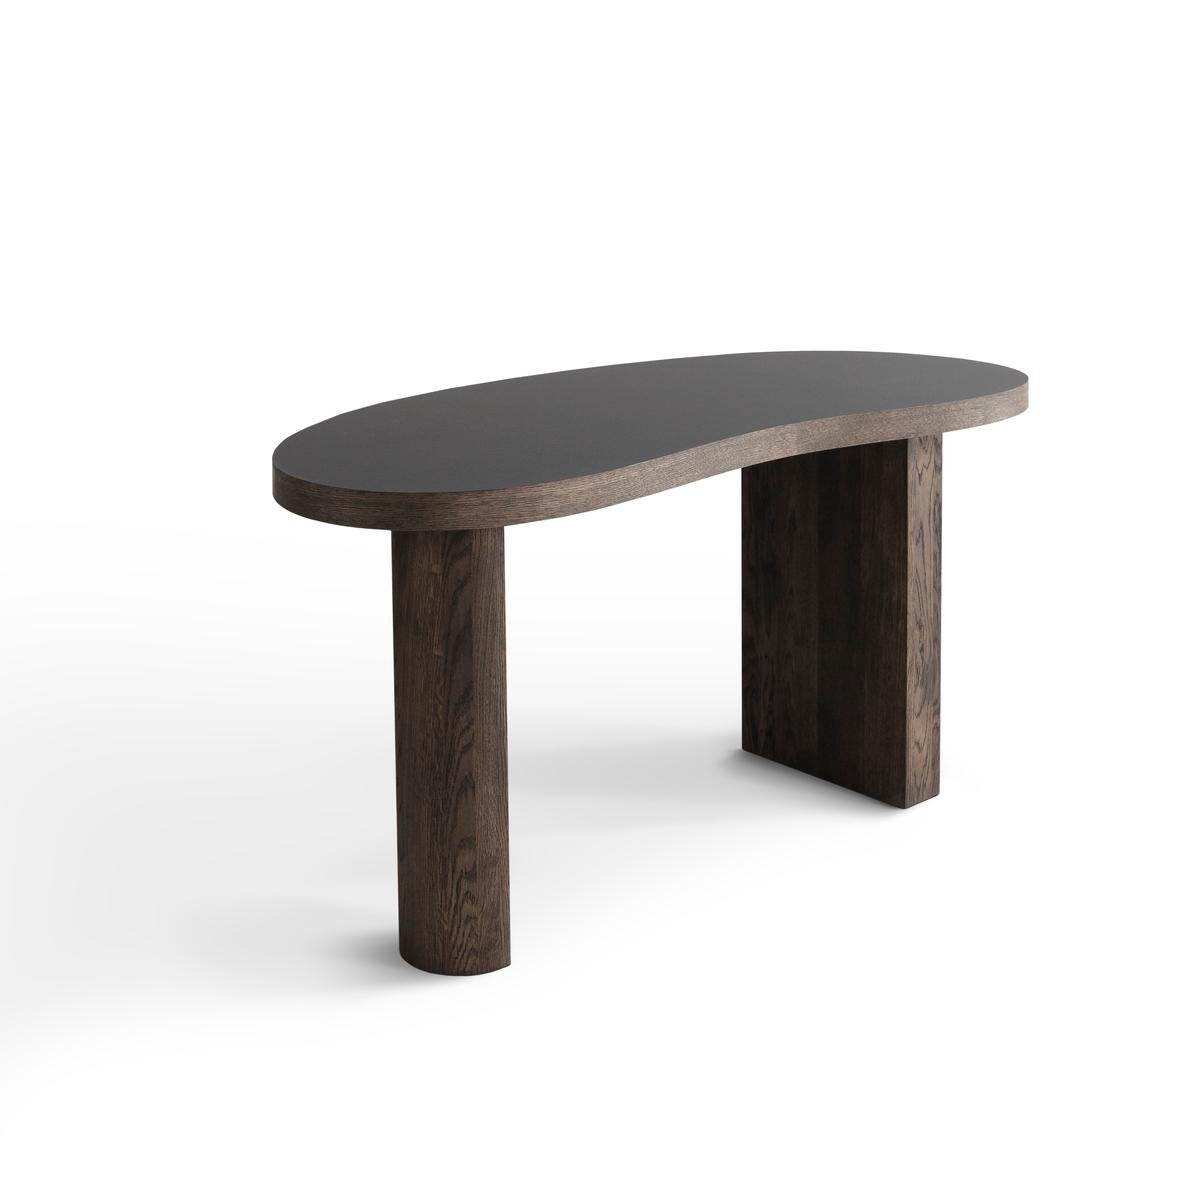 Organic Modern Contemporary Desk Table 'Ms Bean', Smoked Oak For Sale